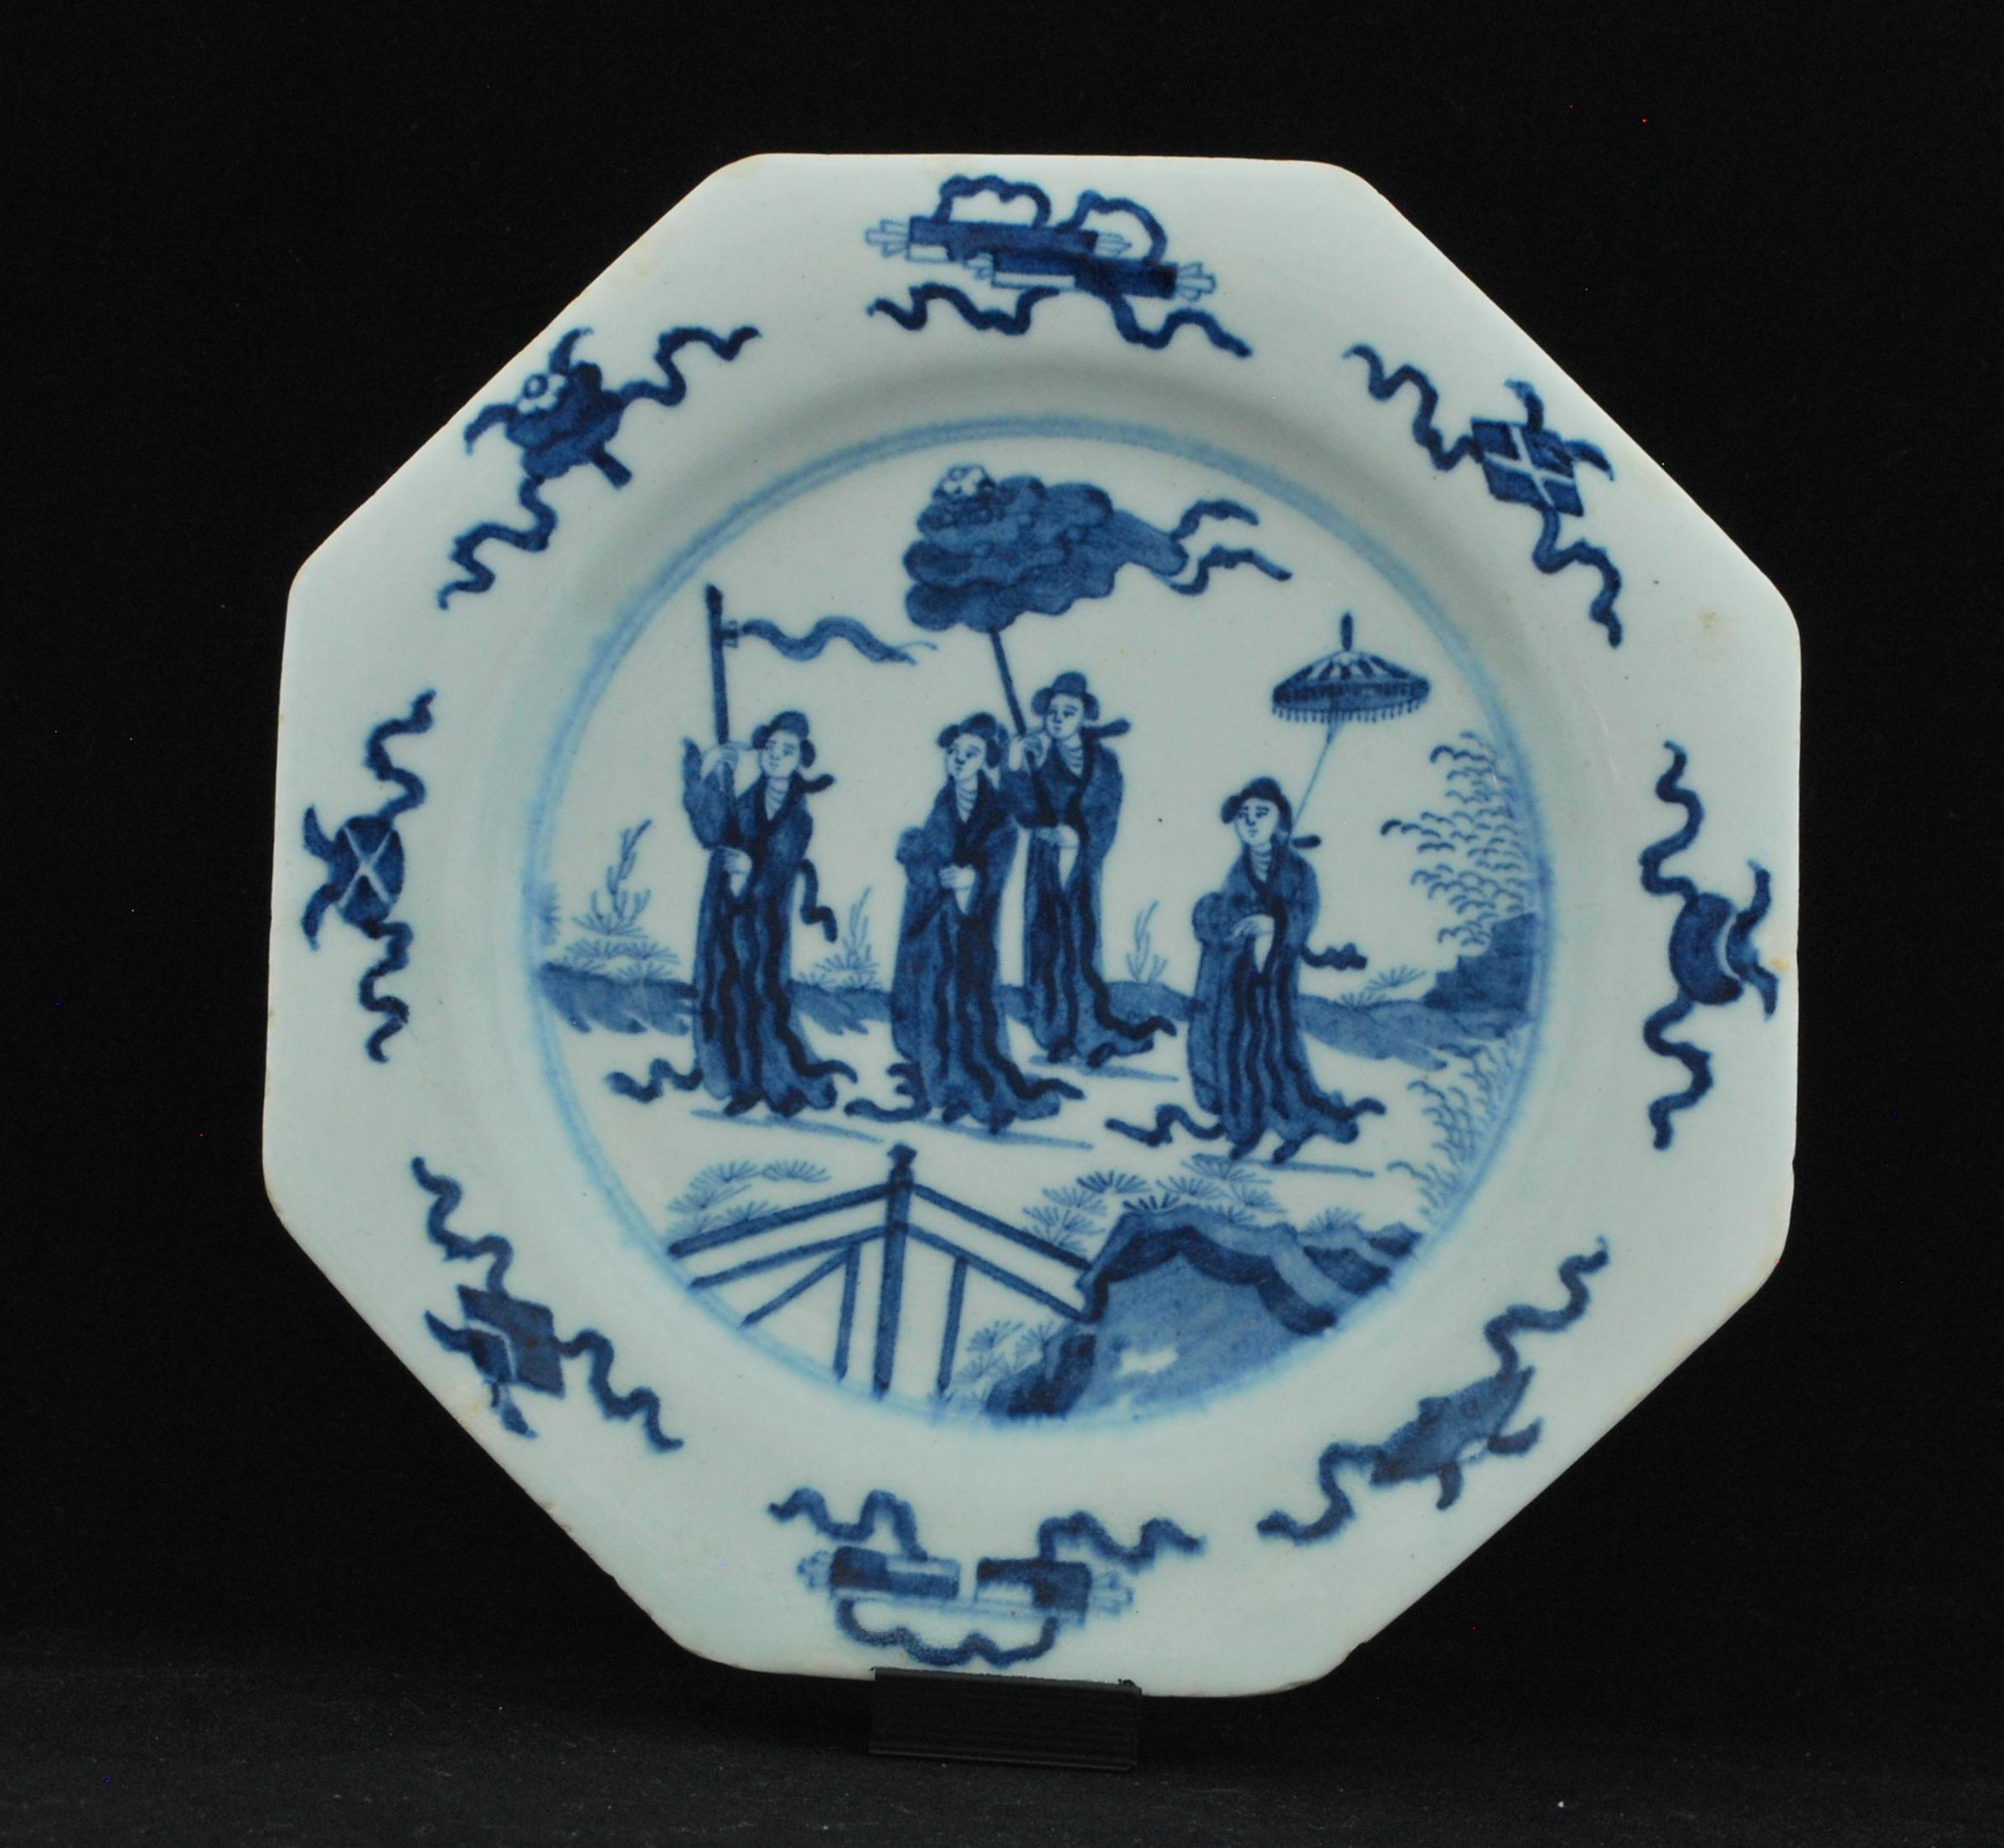 Plate, circa 1755-1760: Octagonal plate, the decoration after an oriental original (possibly from the region now modern Bhutan), with four robed ladies walking through a stylized landscape, the first with a Buddhist prayer flag, the third and fourth